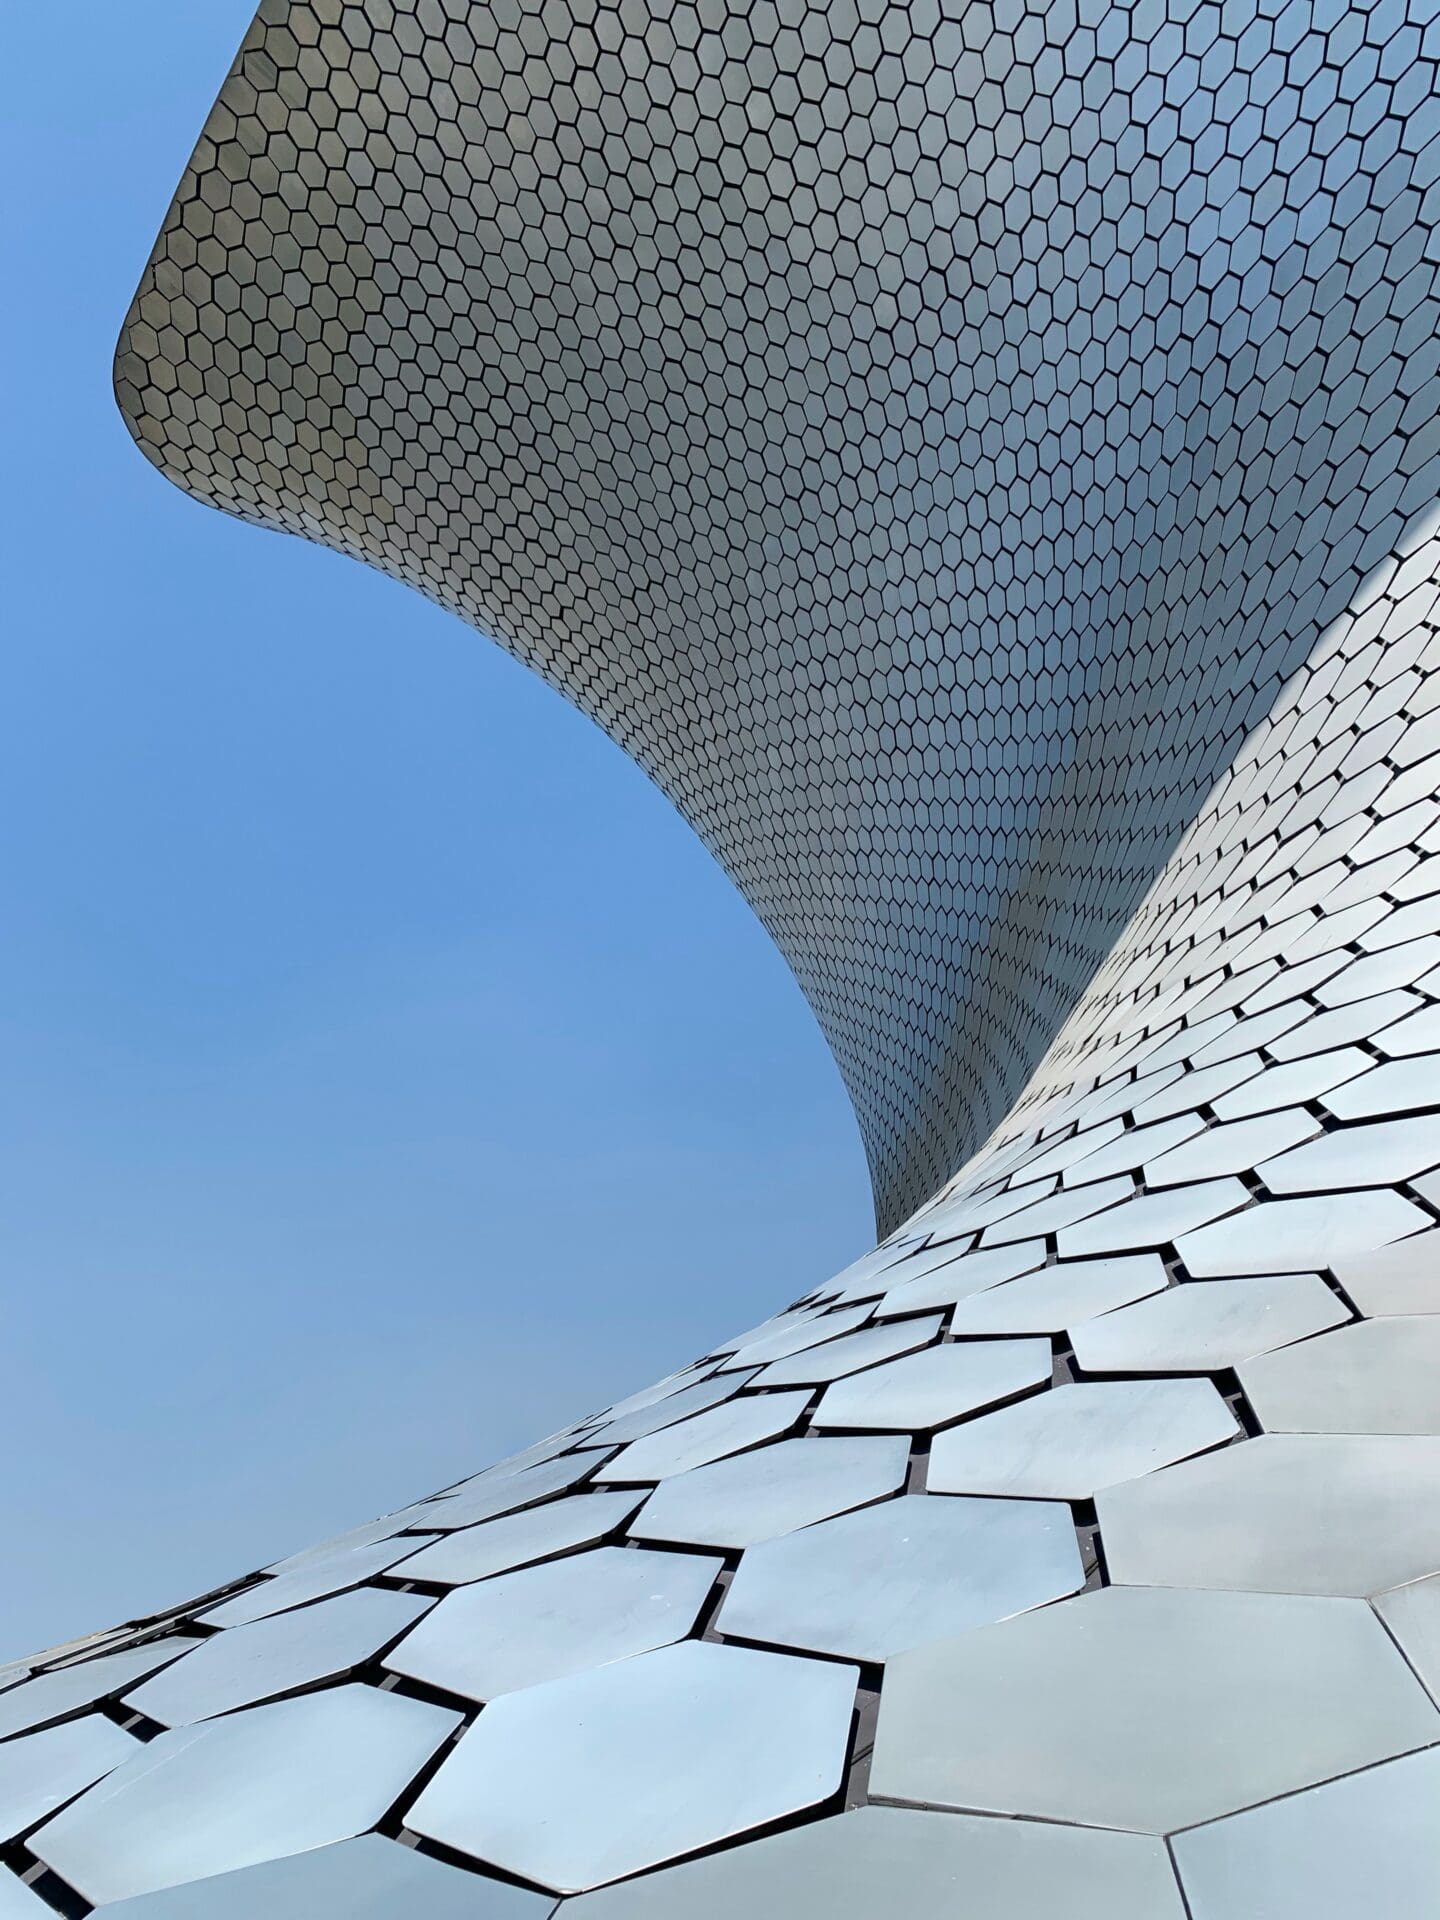 The best art galleries and museums in Mexico City | The dramatic curving facade of Museo Soumaya.